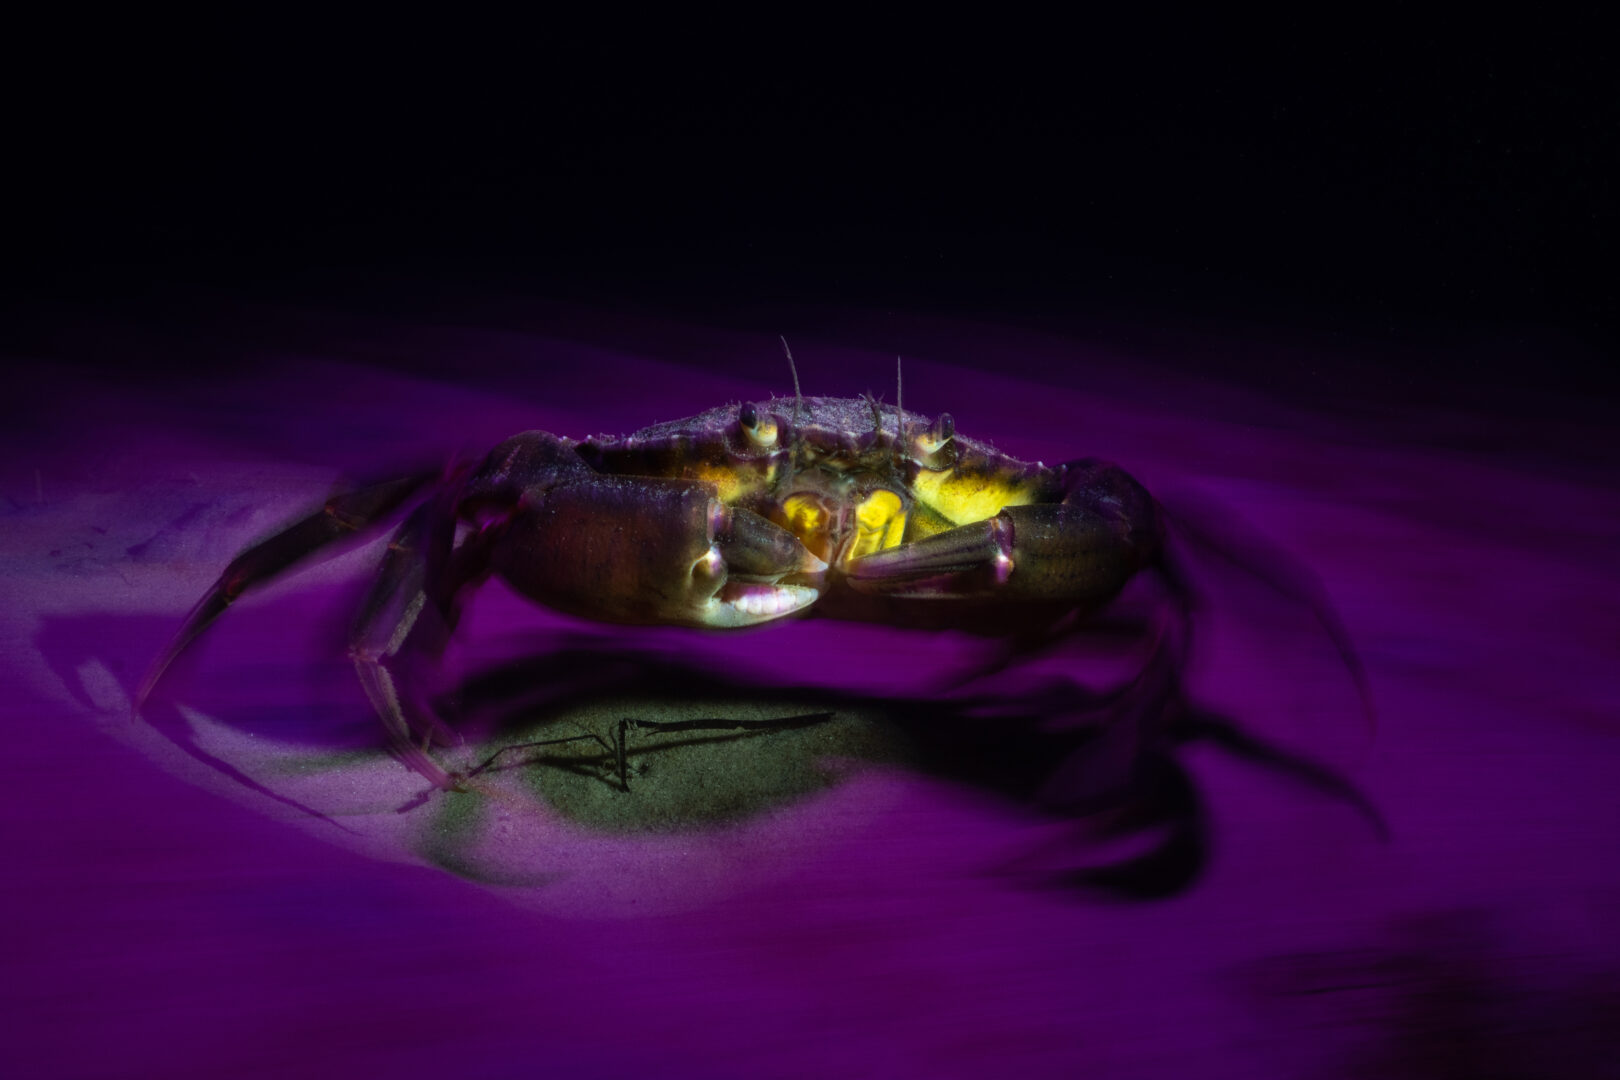 a crab stands on the sea floor bathed in purple and white light, staring at the camera